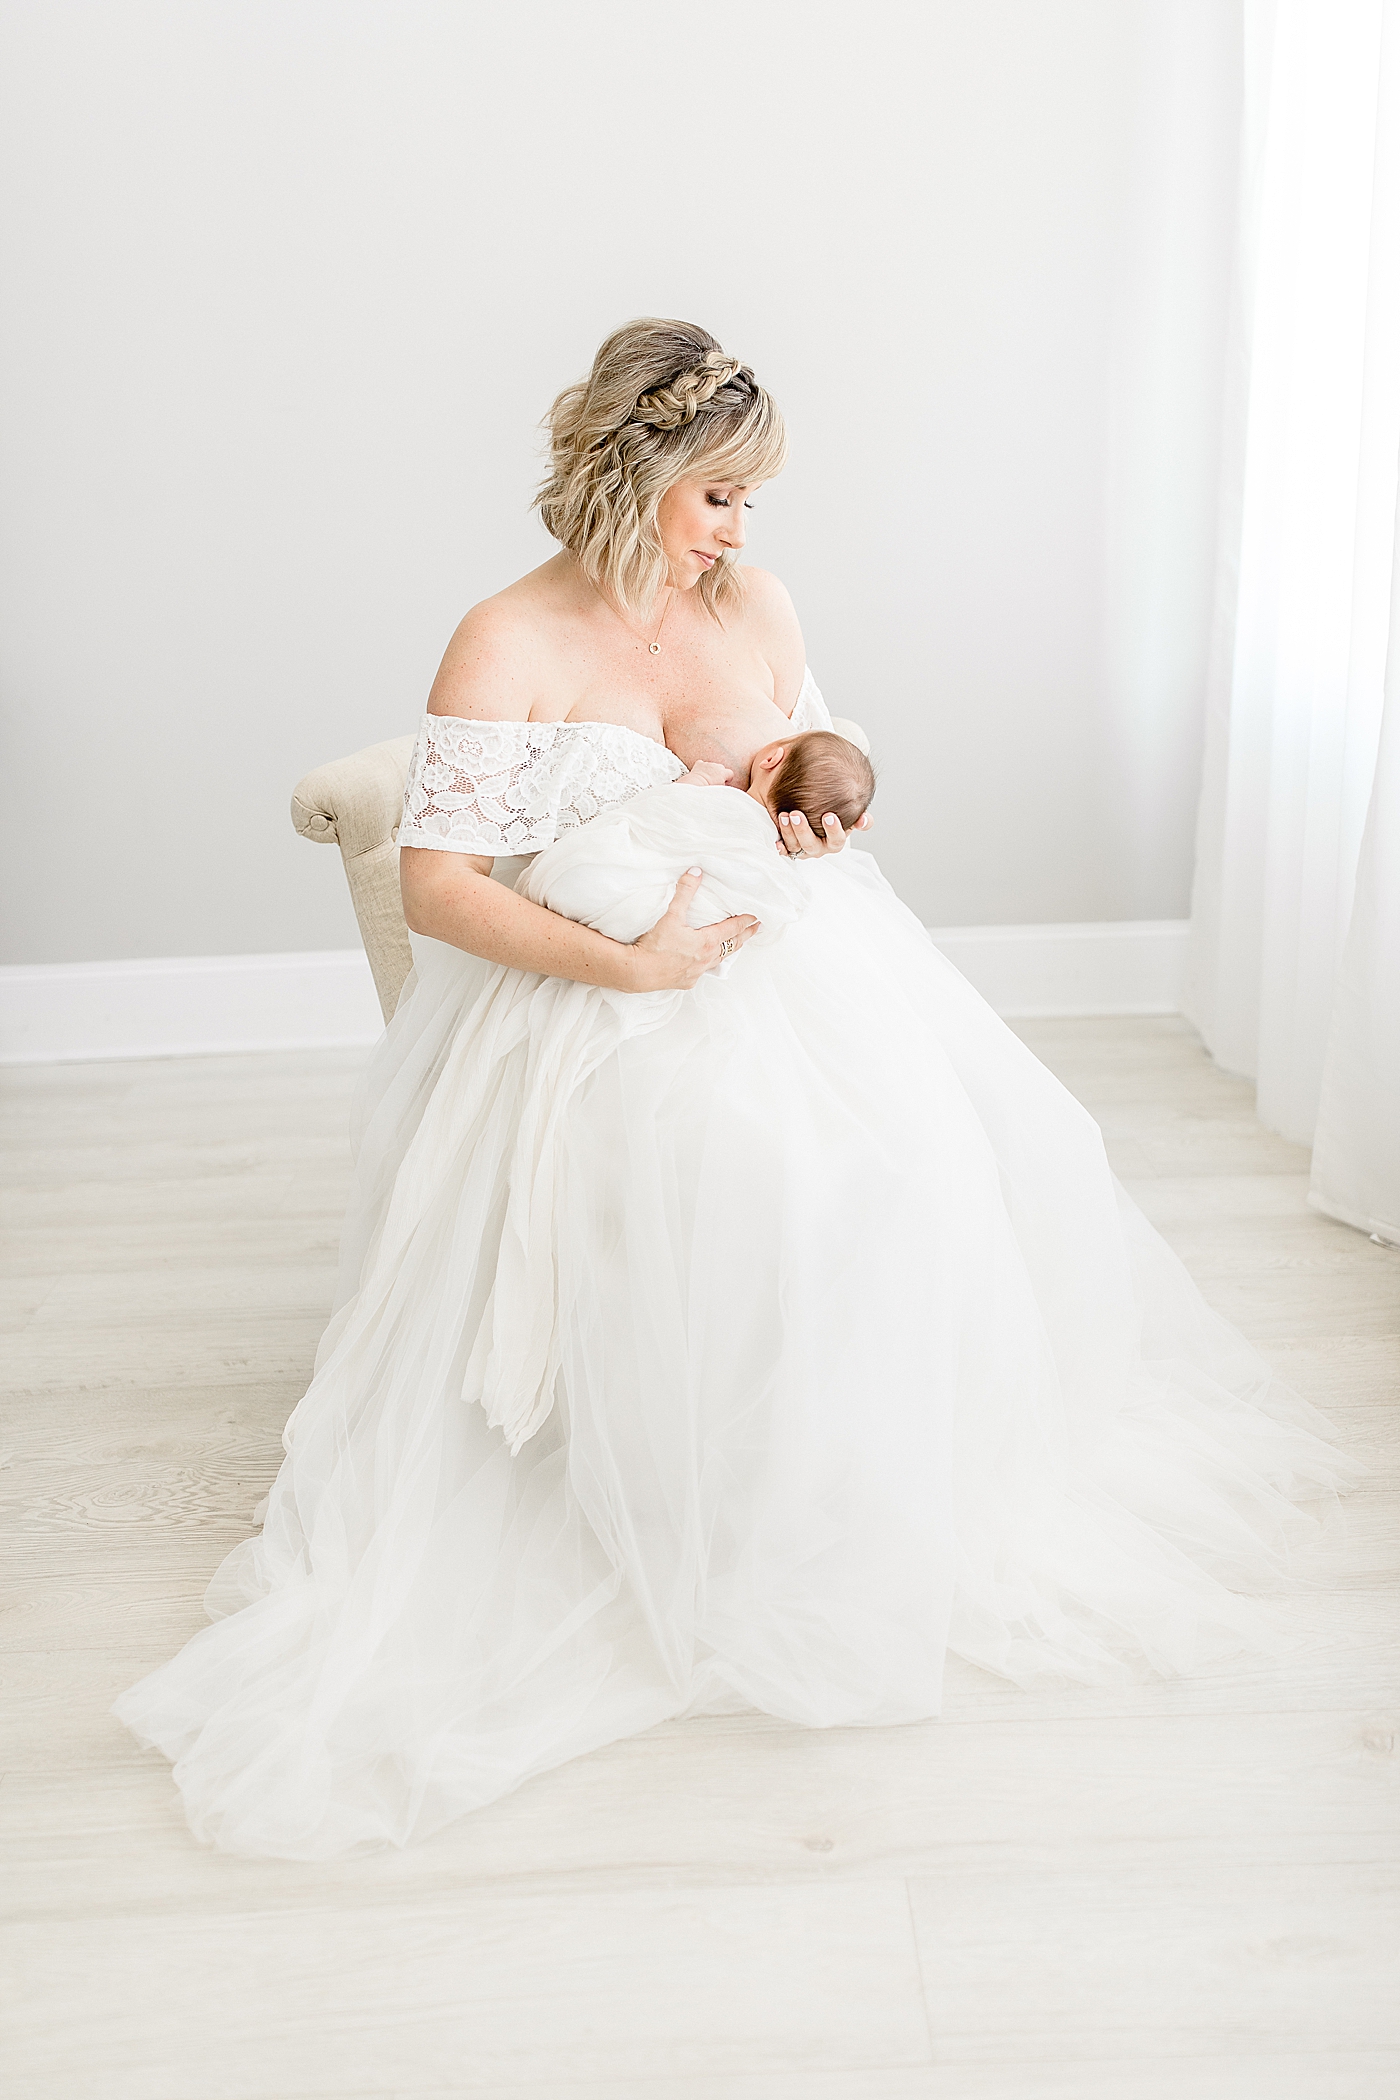 Mom in beautiful tulle white dress nursing her newborn. Photo by Brittany Elise Photography.